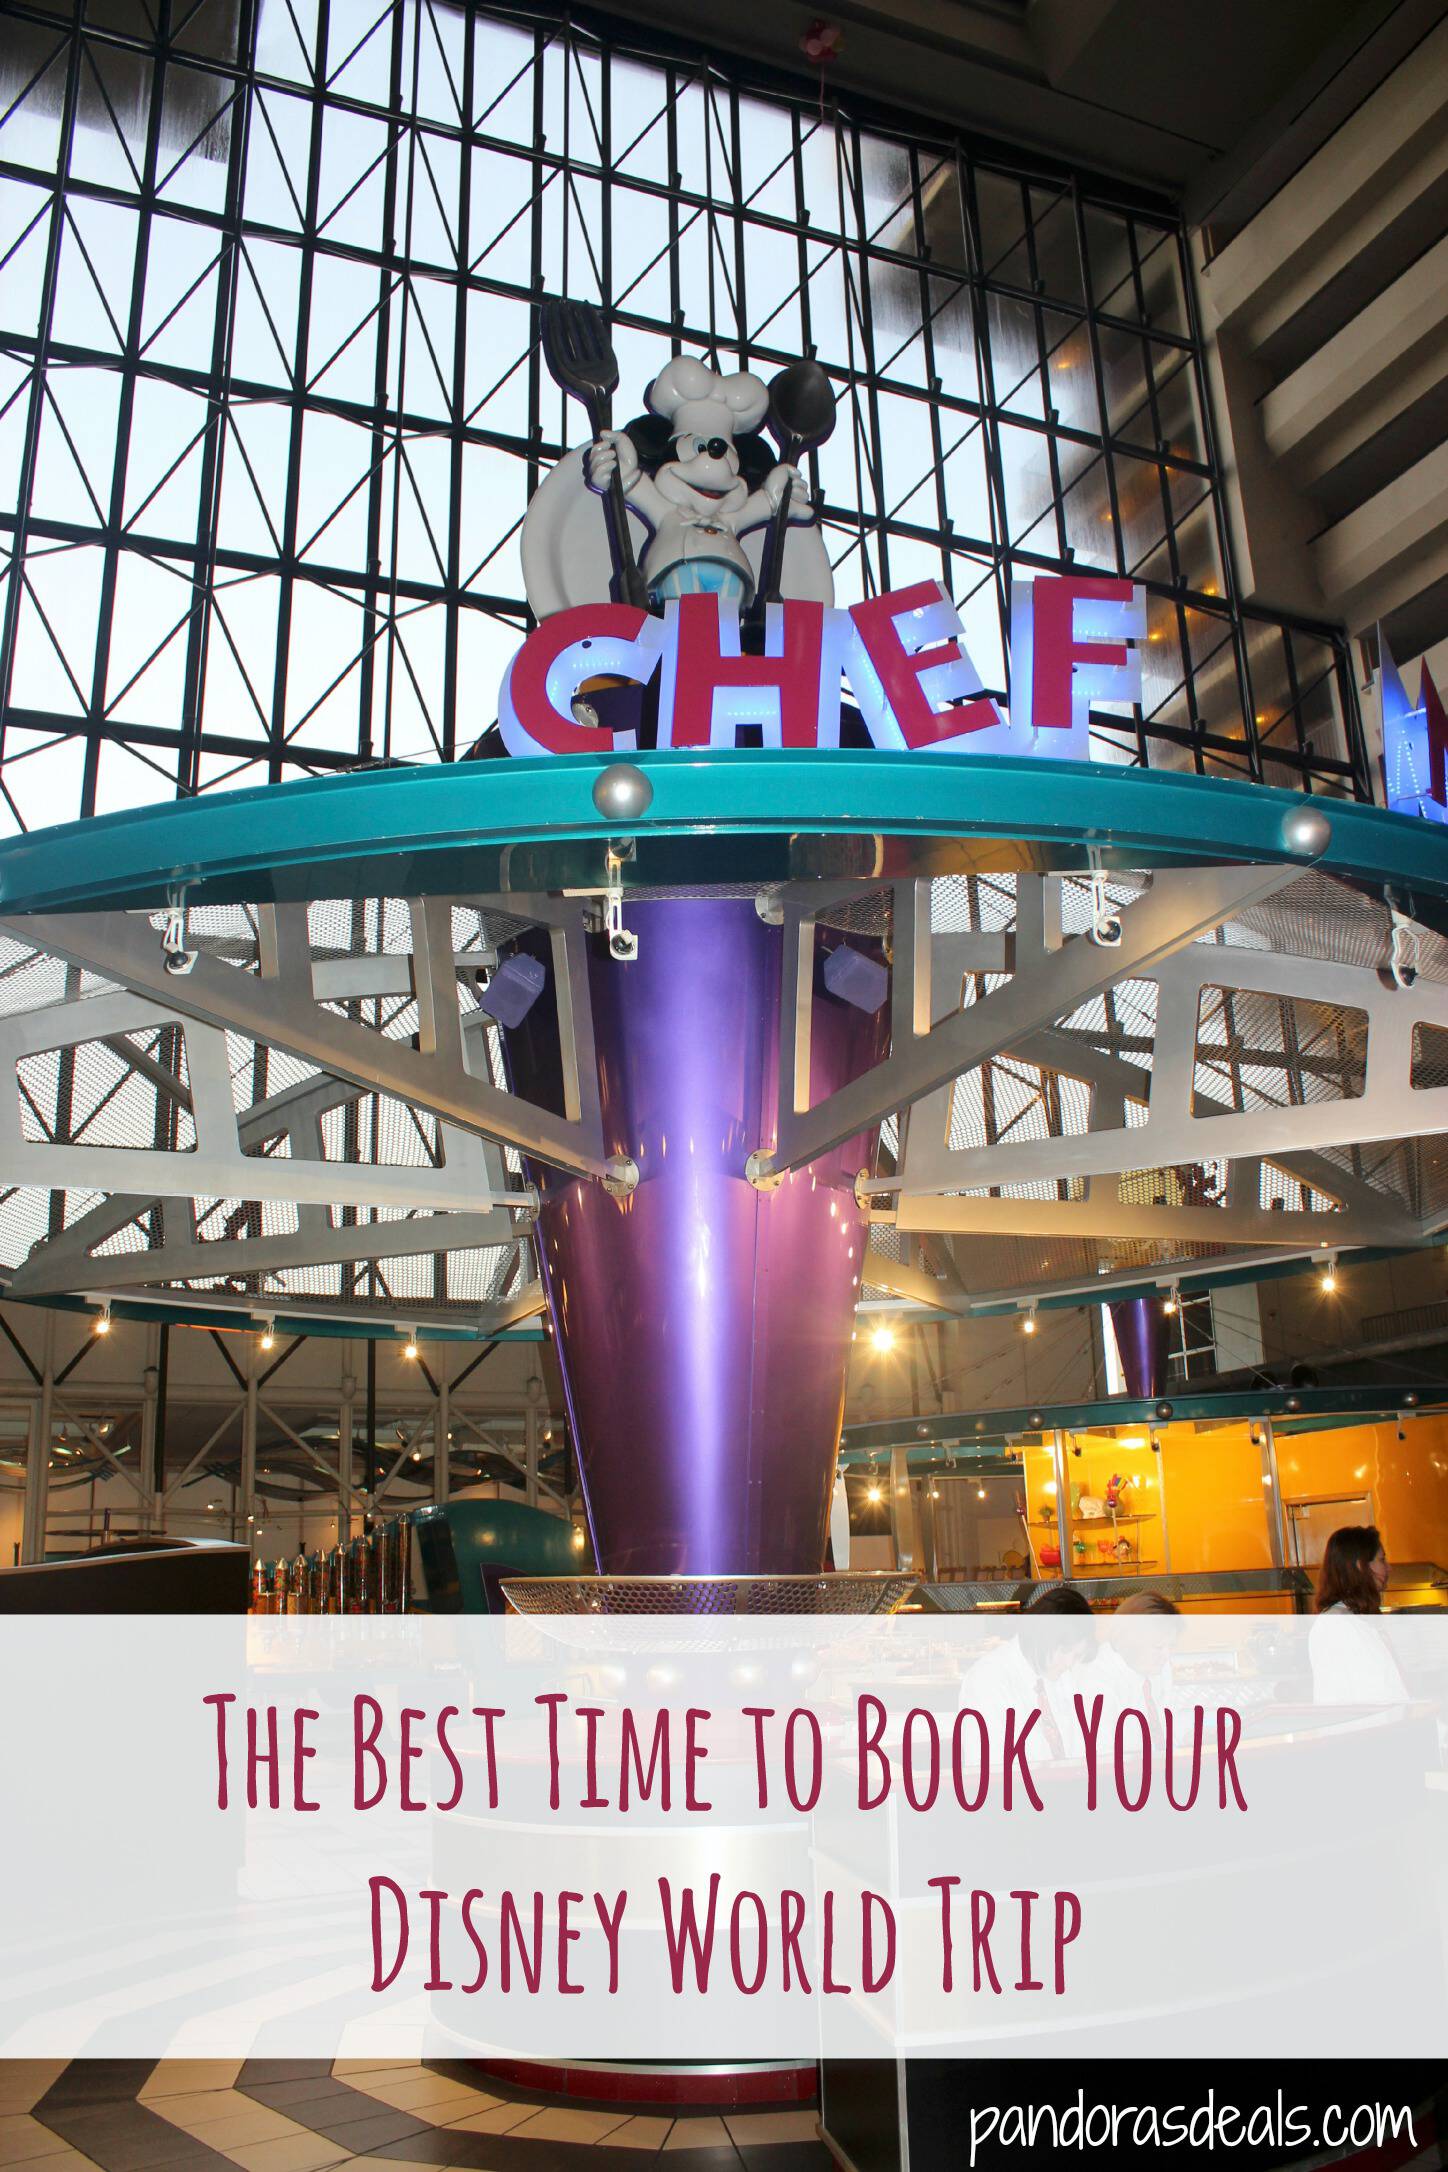 The Best Time to Book Your Disney World Trip